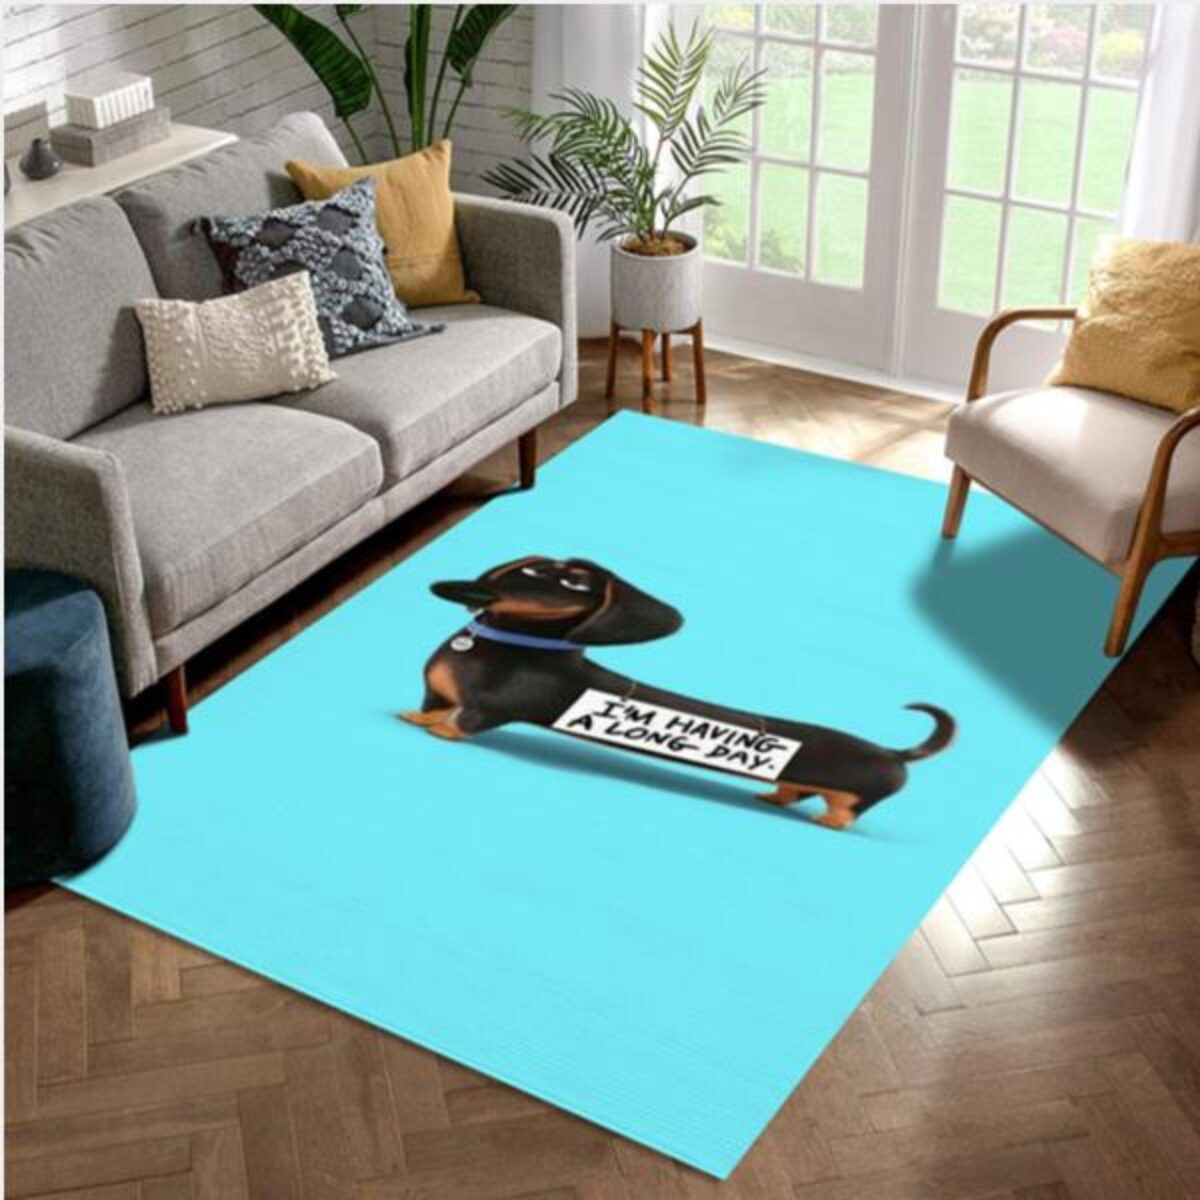 Dachshund Dogs Area Rug and Runner Personalized Indoor Many Designs NWT NEW